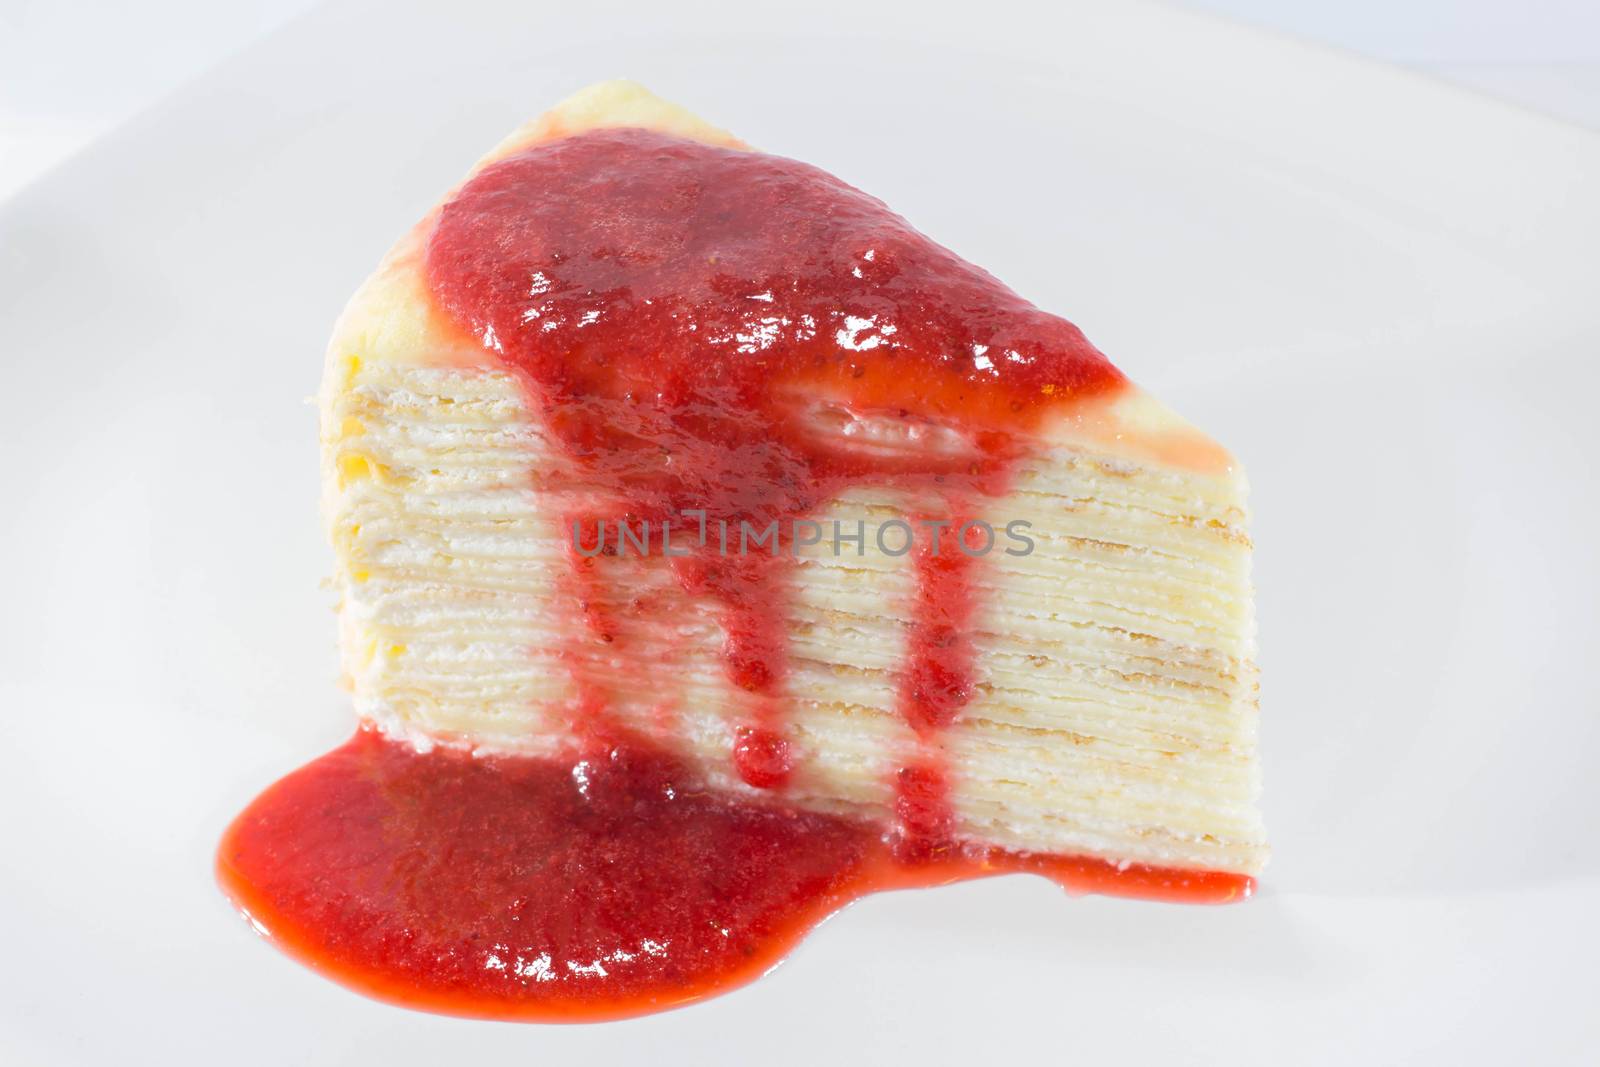 Crepe Cake with strawberry source by ttt1341